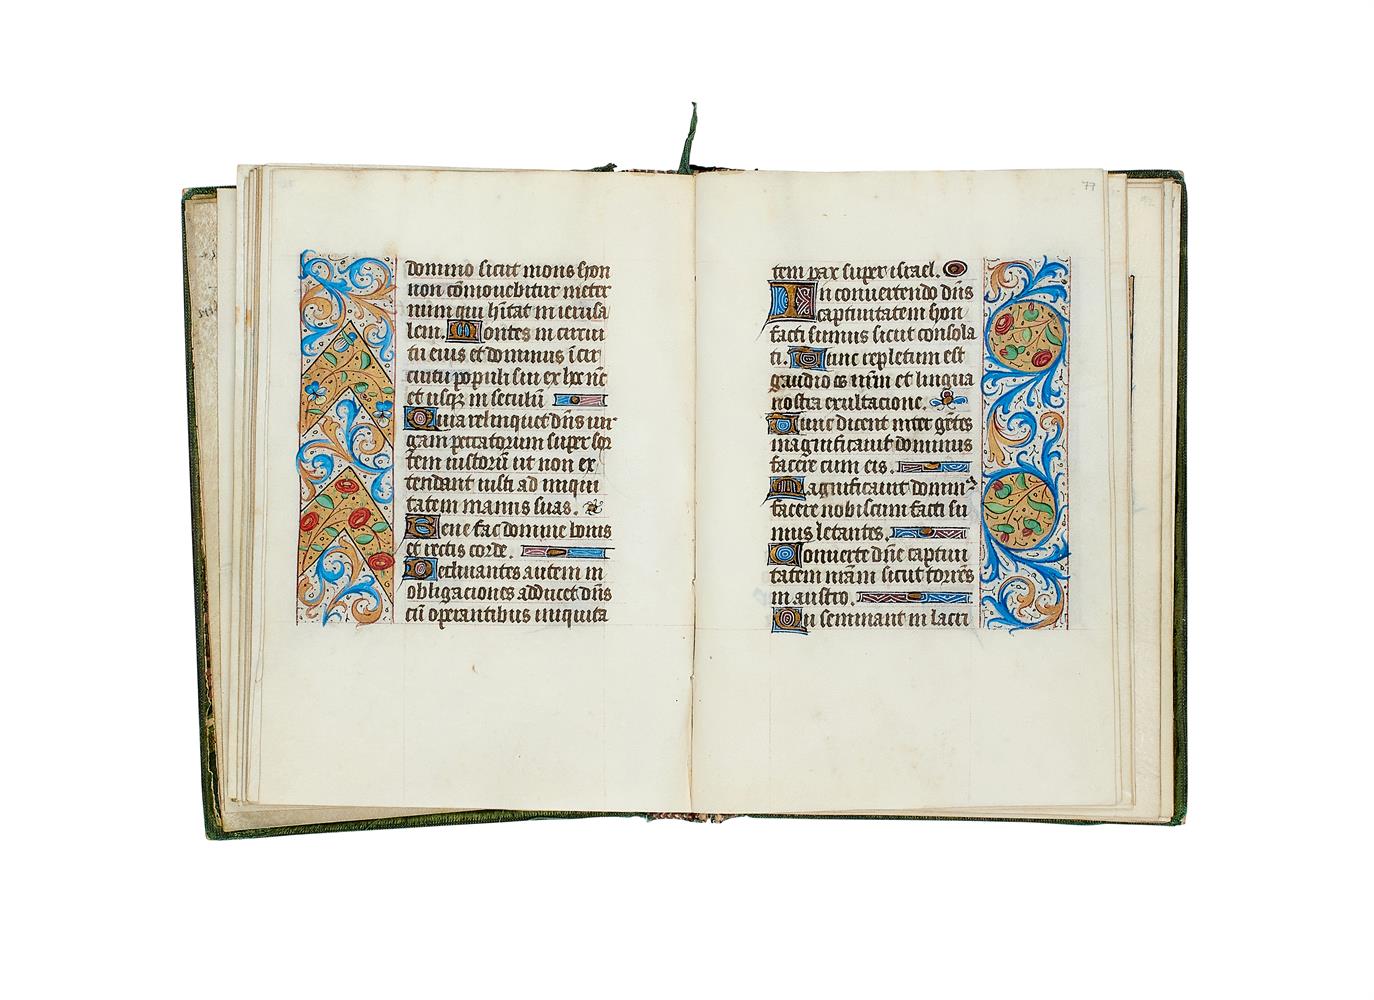 Ɵ Book of Hours, in Latin, illuminated manuscript on parchment